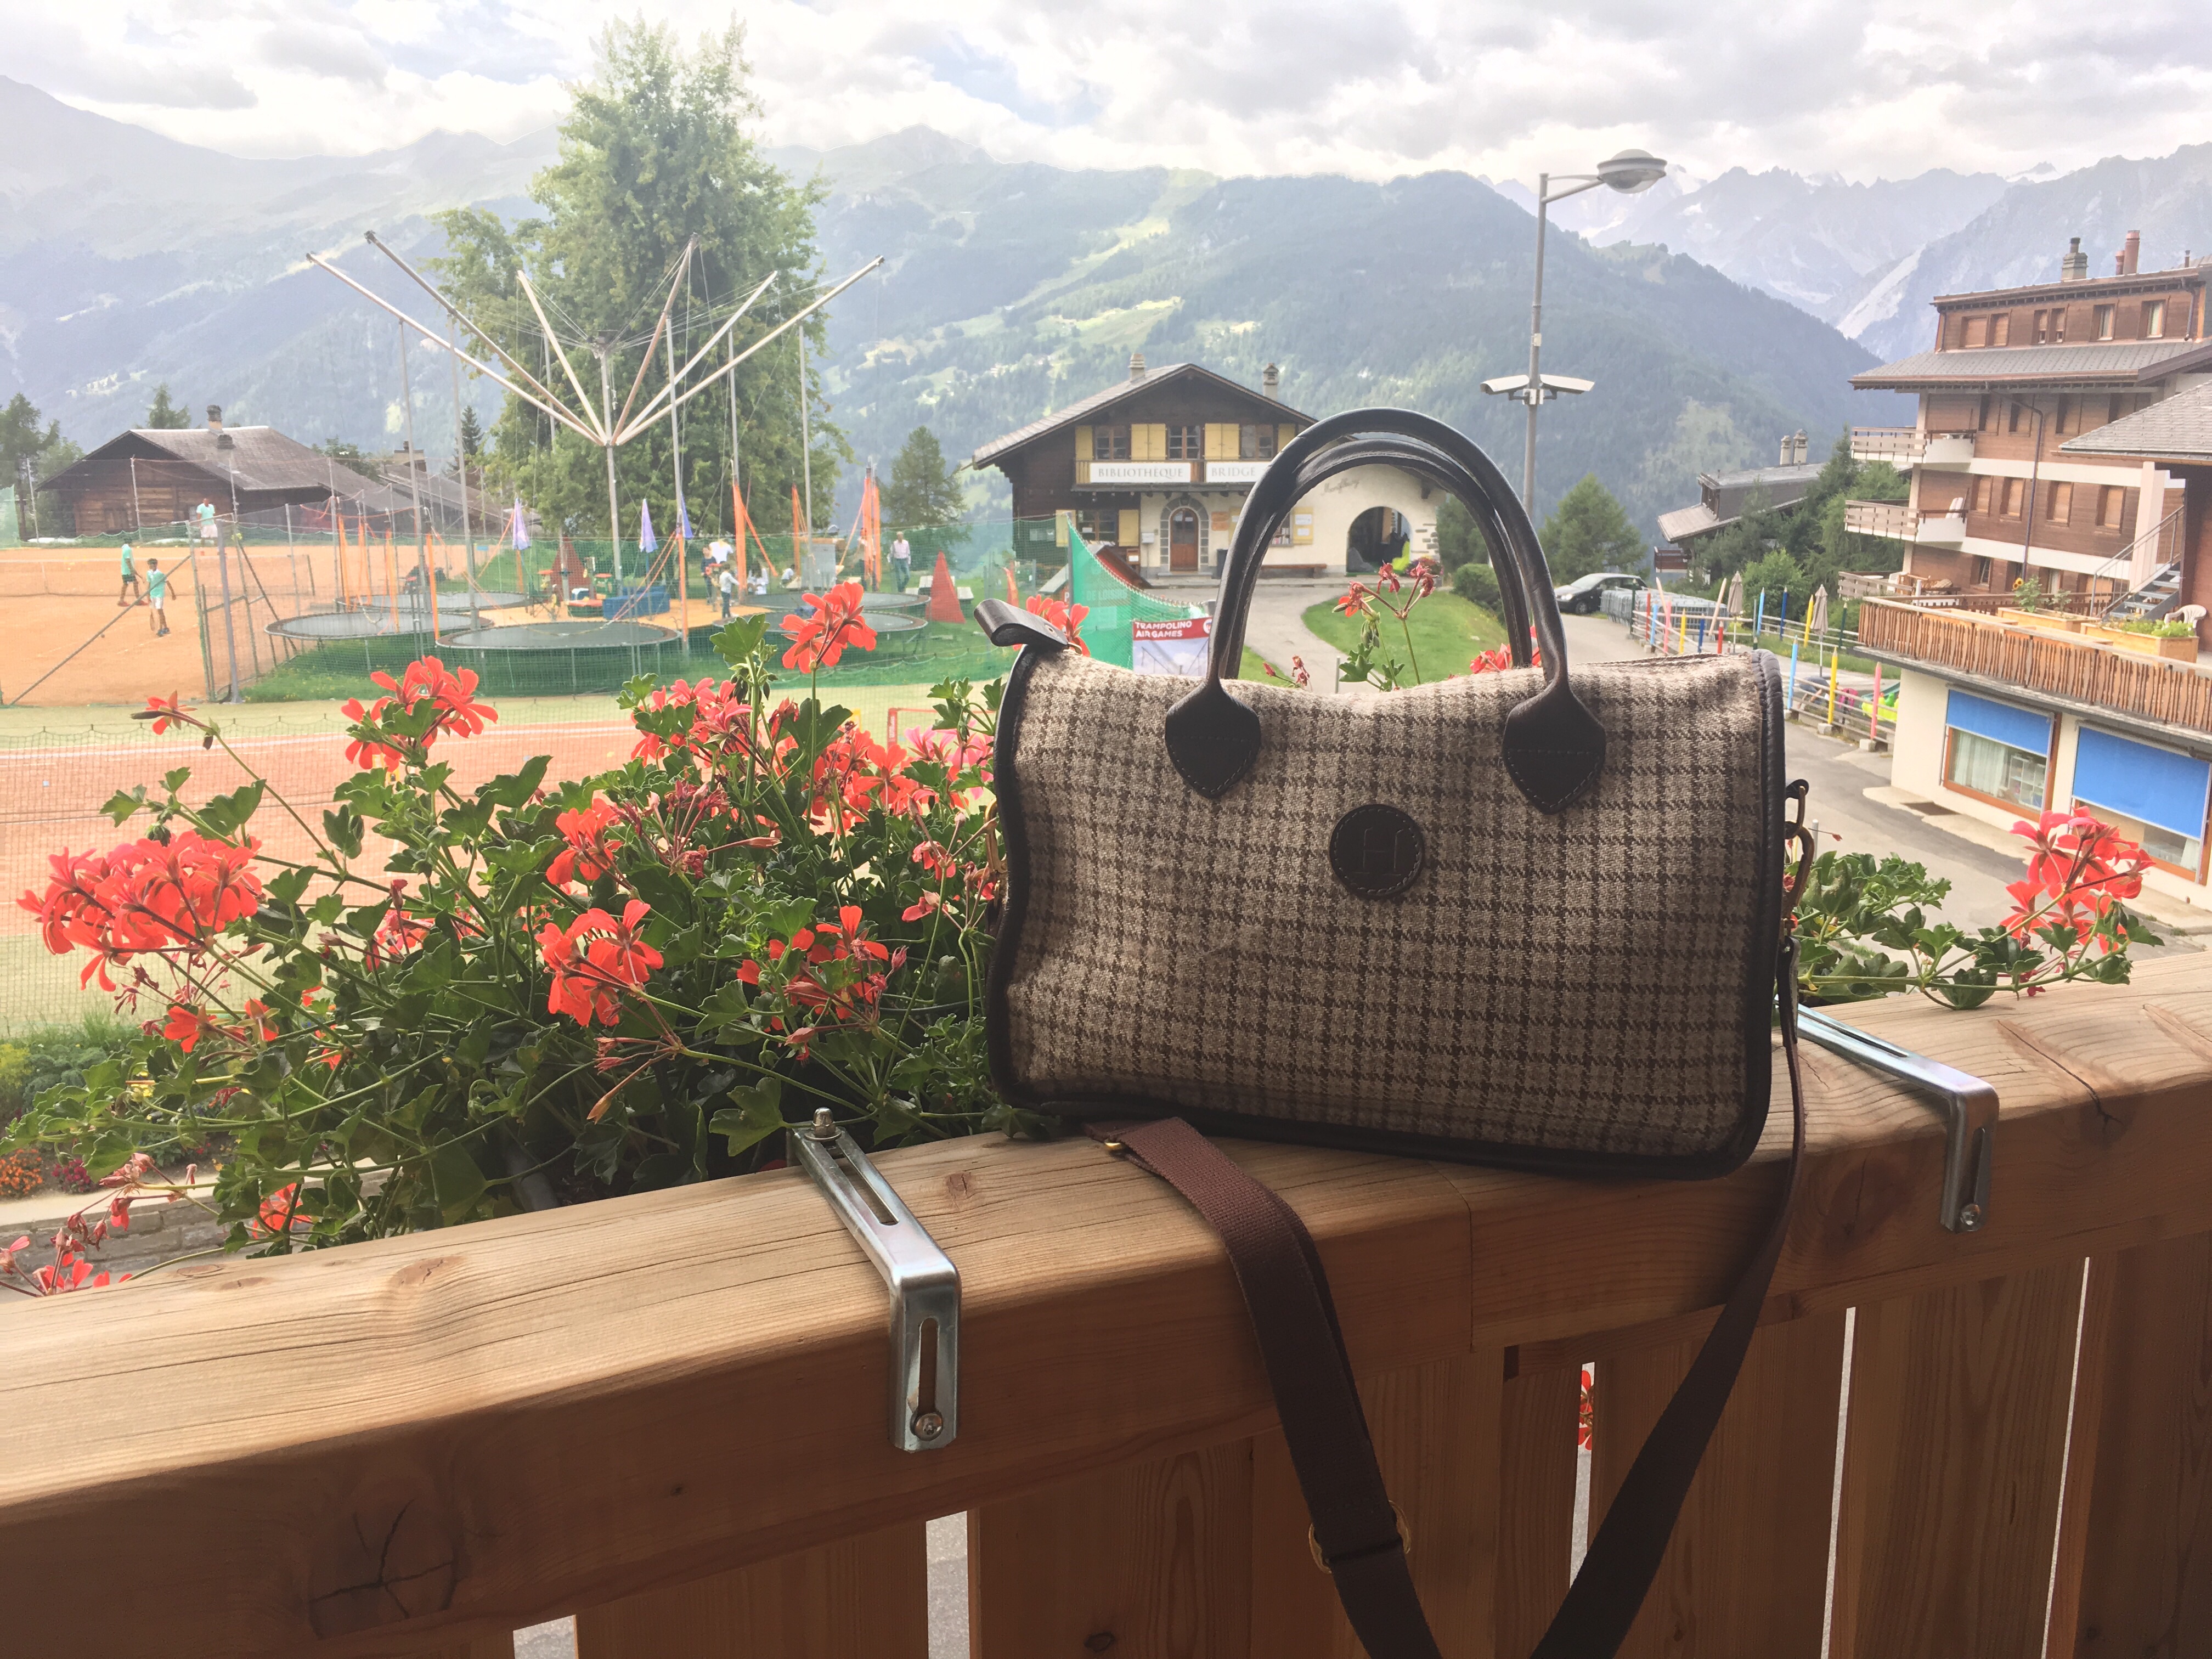 www.educated-traveller.com is the proud owner of a Herdwick Hand Bag, made from the wool of Herdwick sheep who live in the Lake District, England.